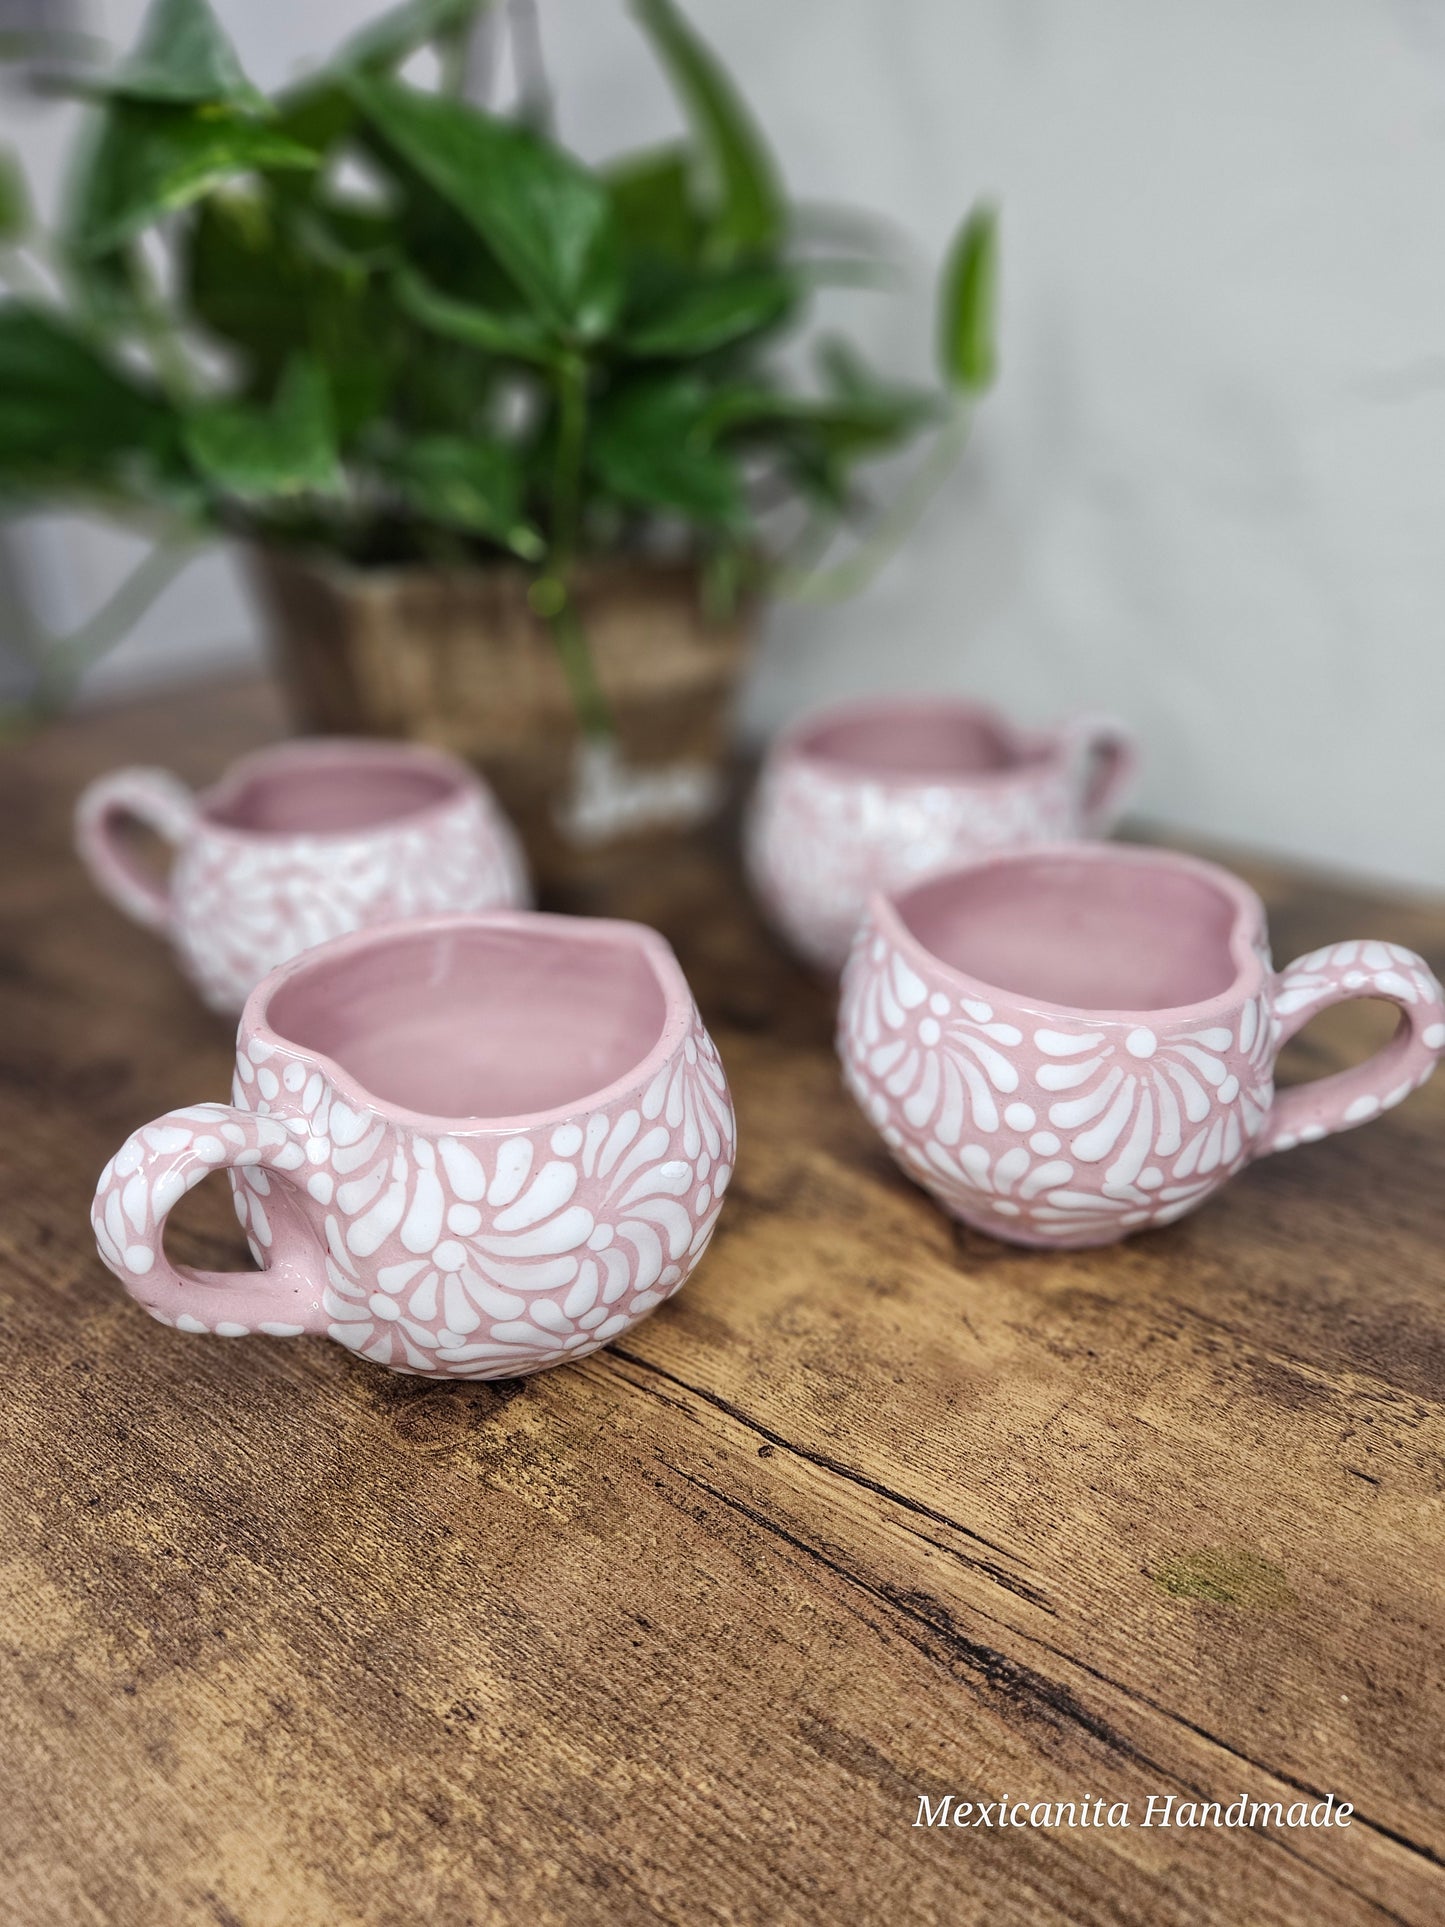 Talavera heart shaped mug|| Talavera heart shaped cup